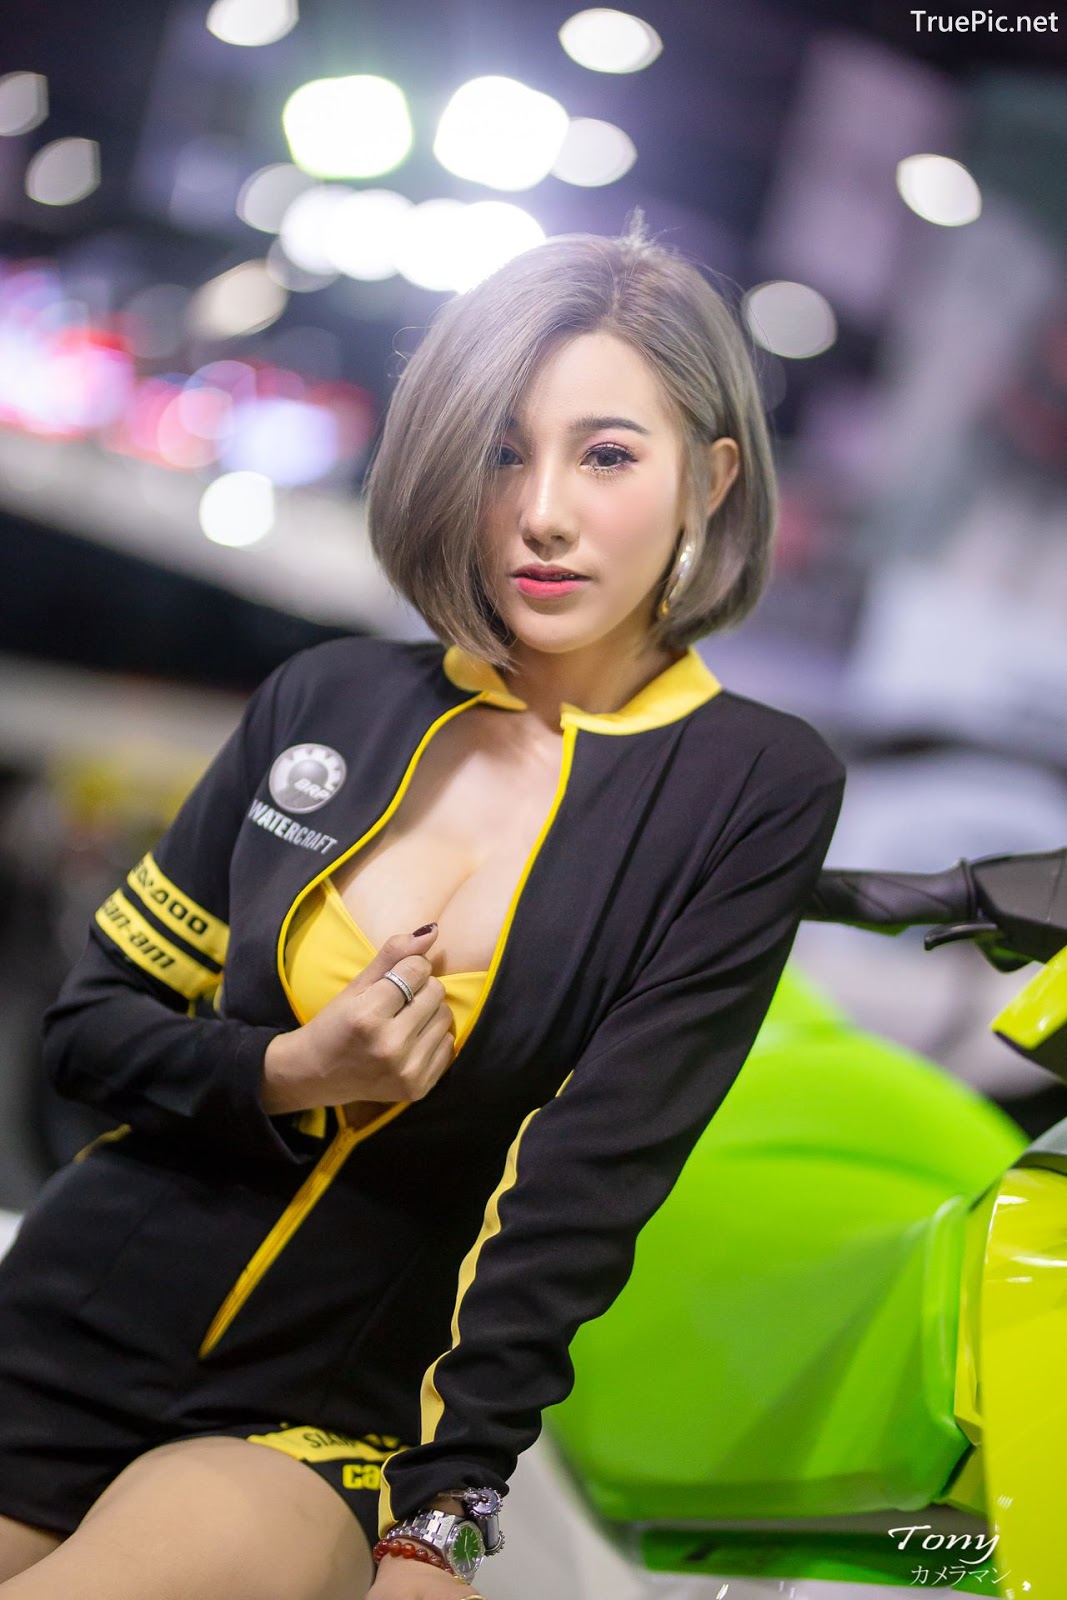 Image-Thailand-Hot-Model-Thai-Racing-Girl-At-Motor-Show-2019-TruePic.net- Picture-58